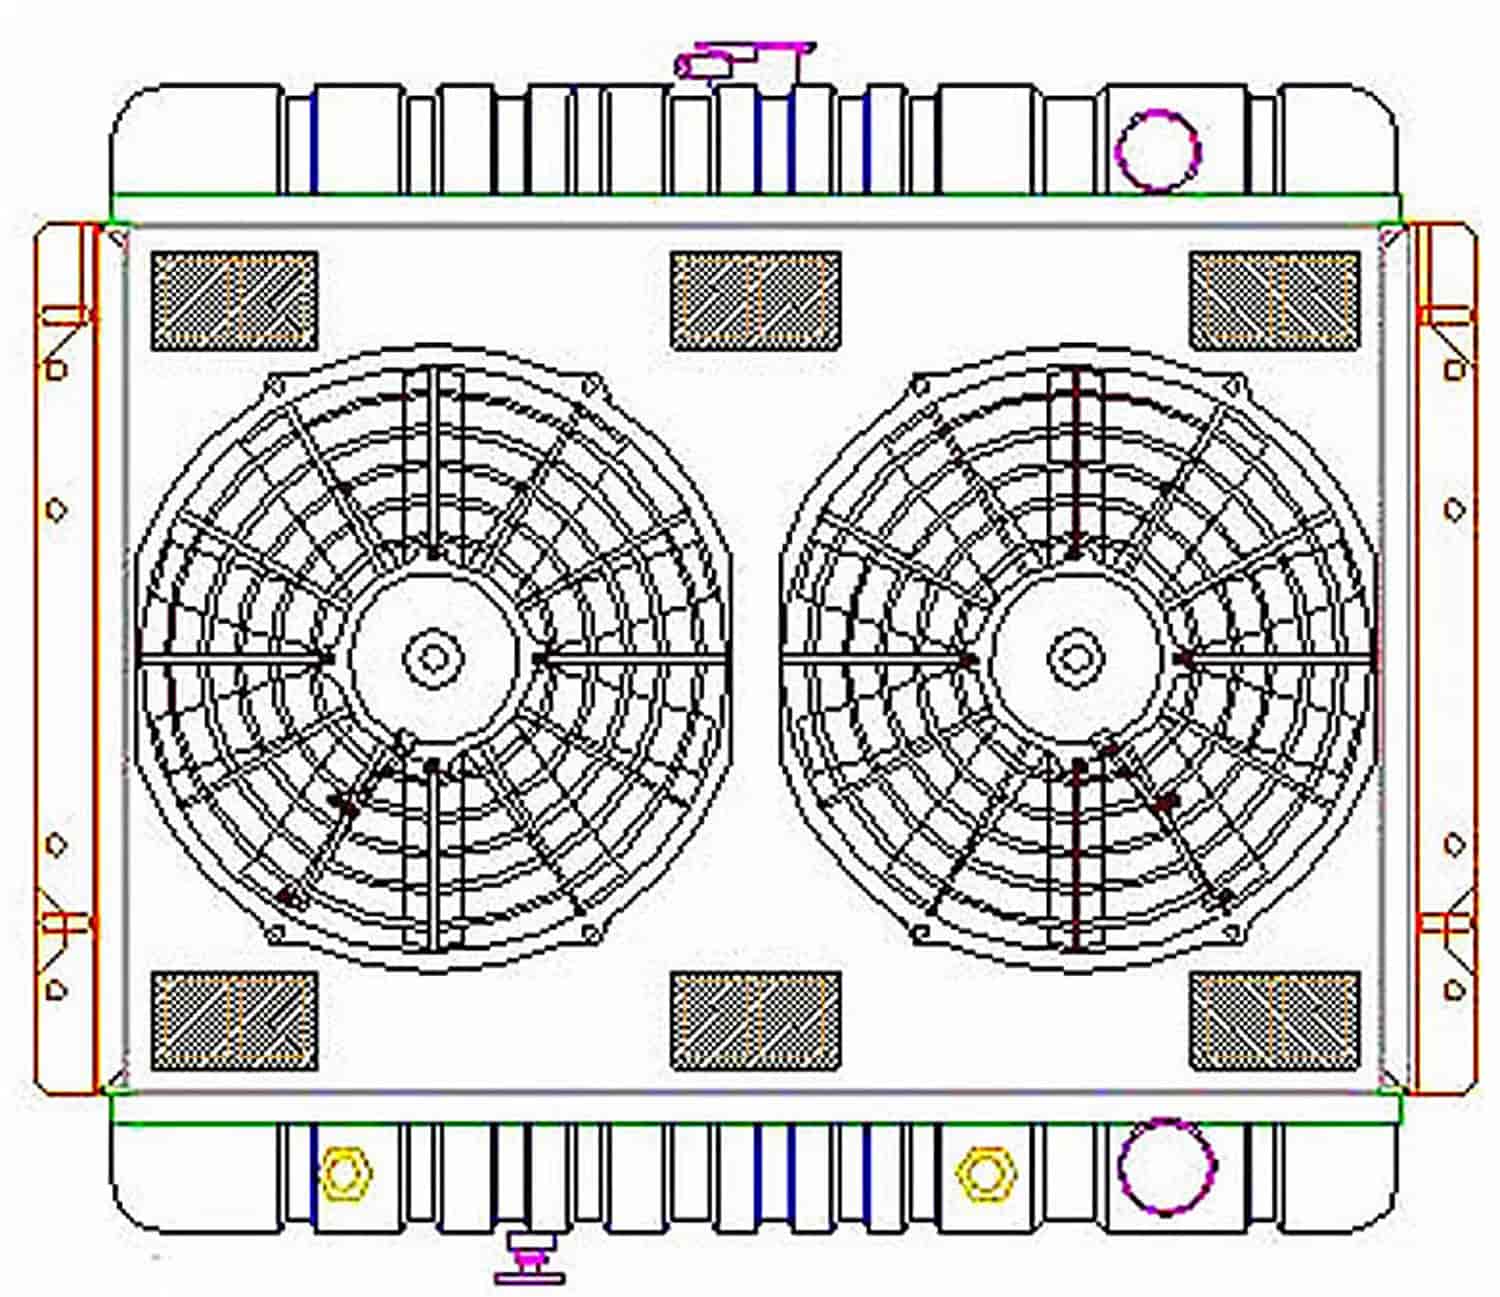 ExactFit Radiator ComboUnit for 1965 Belair/Biscayne/Caprice/Impala with Transmission Cooler